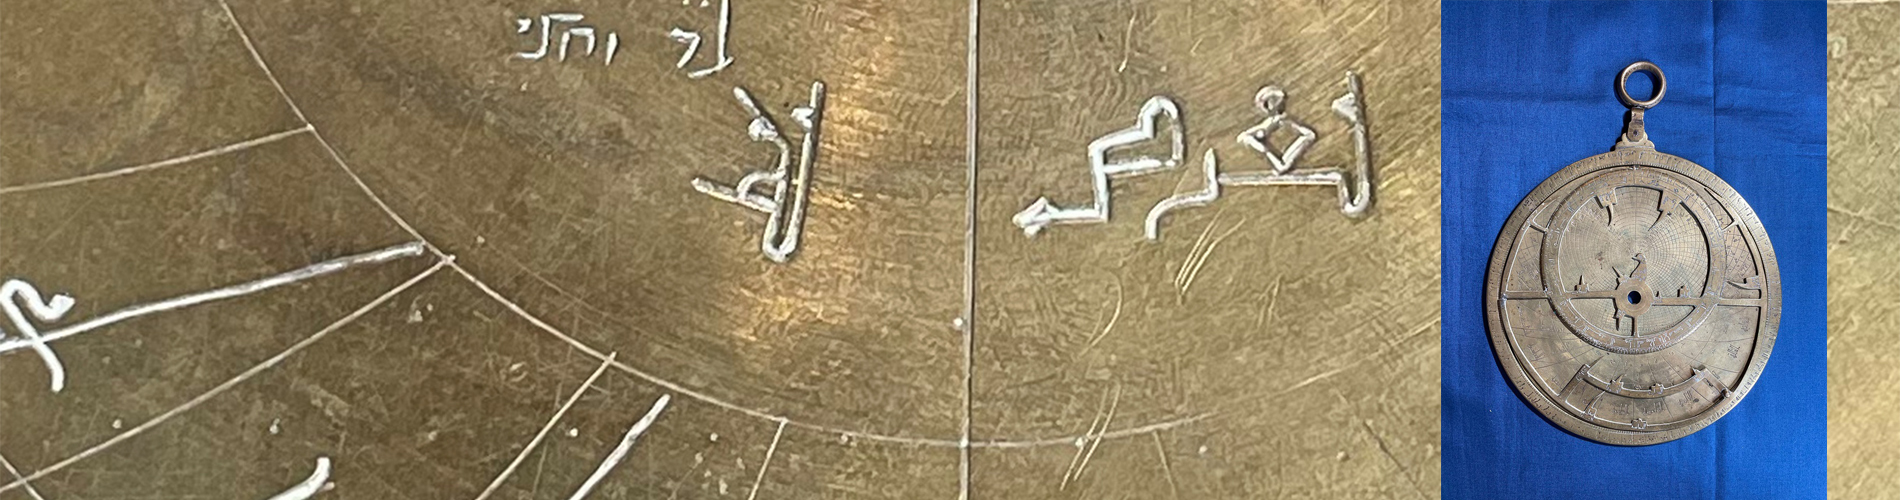 Astrolabe superimposed on detail of inscriptions